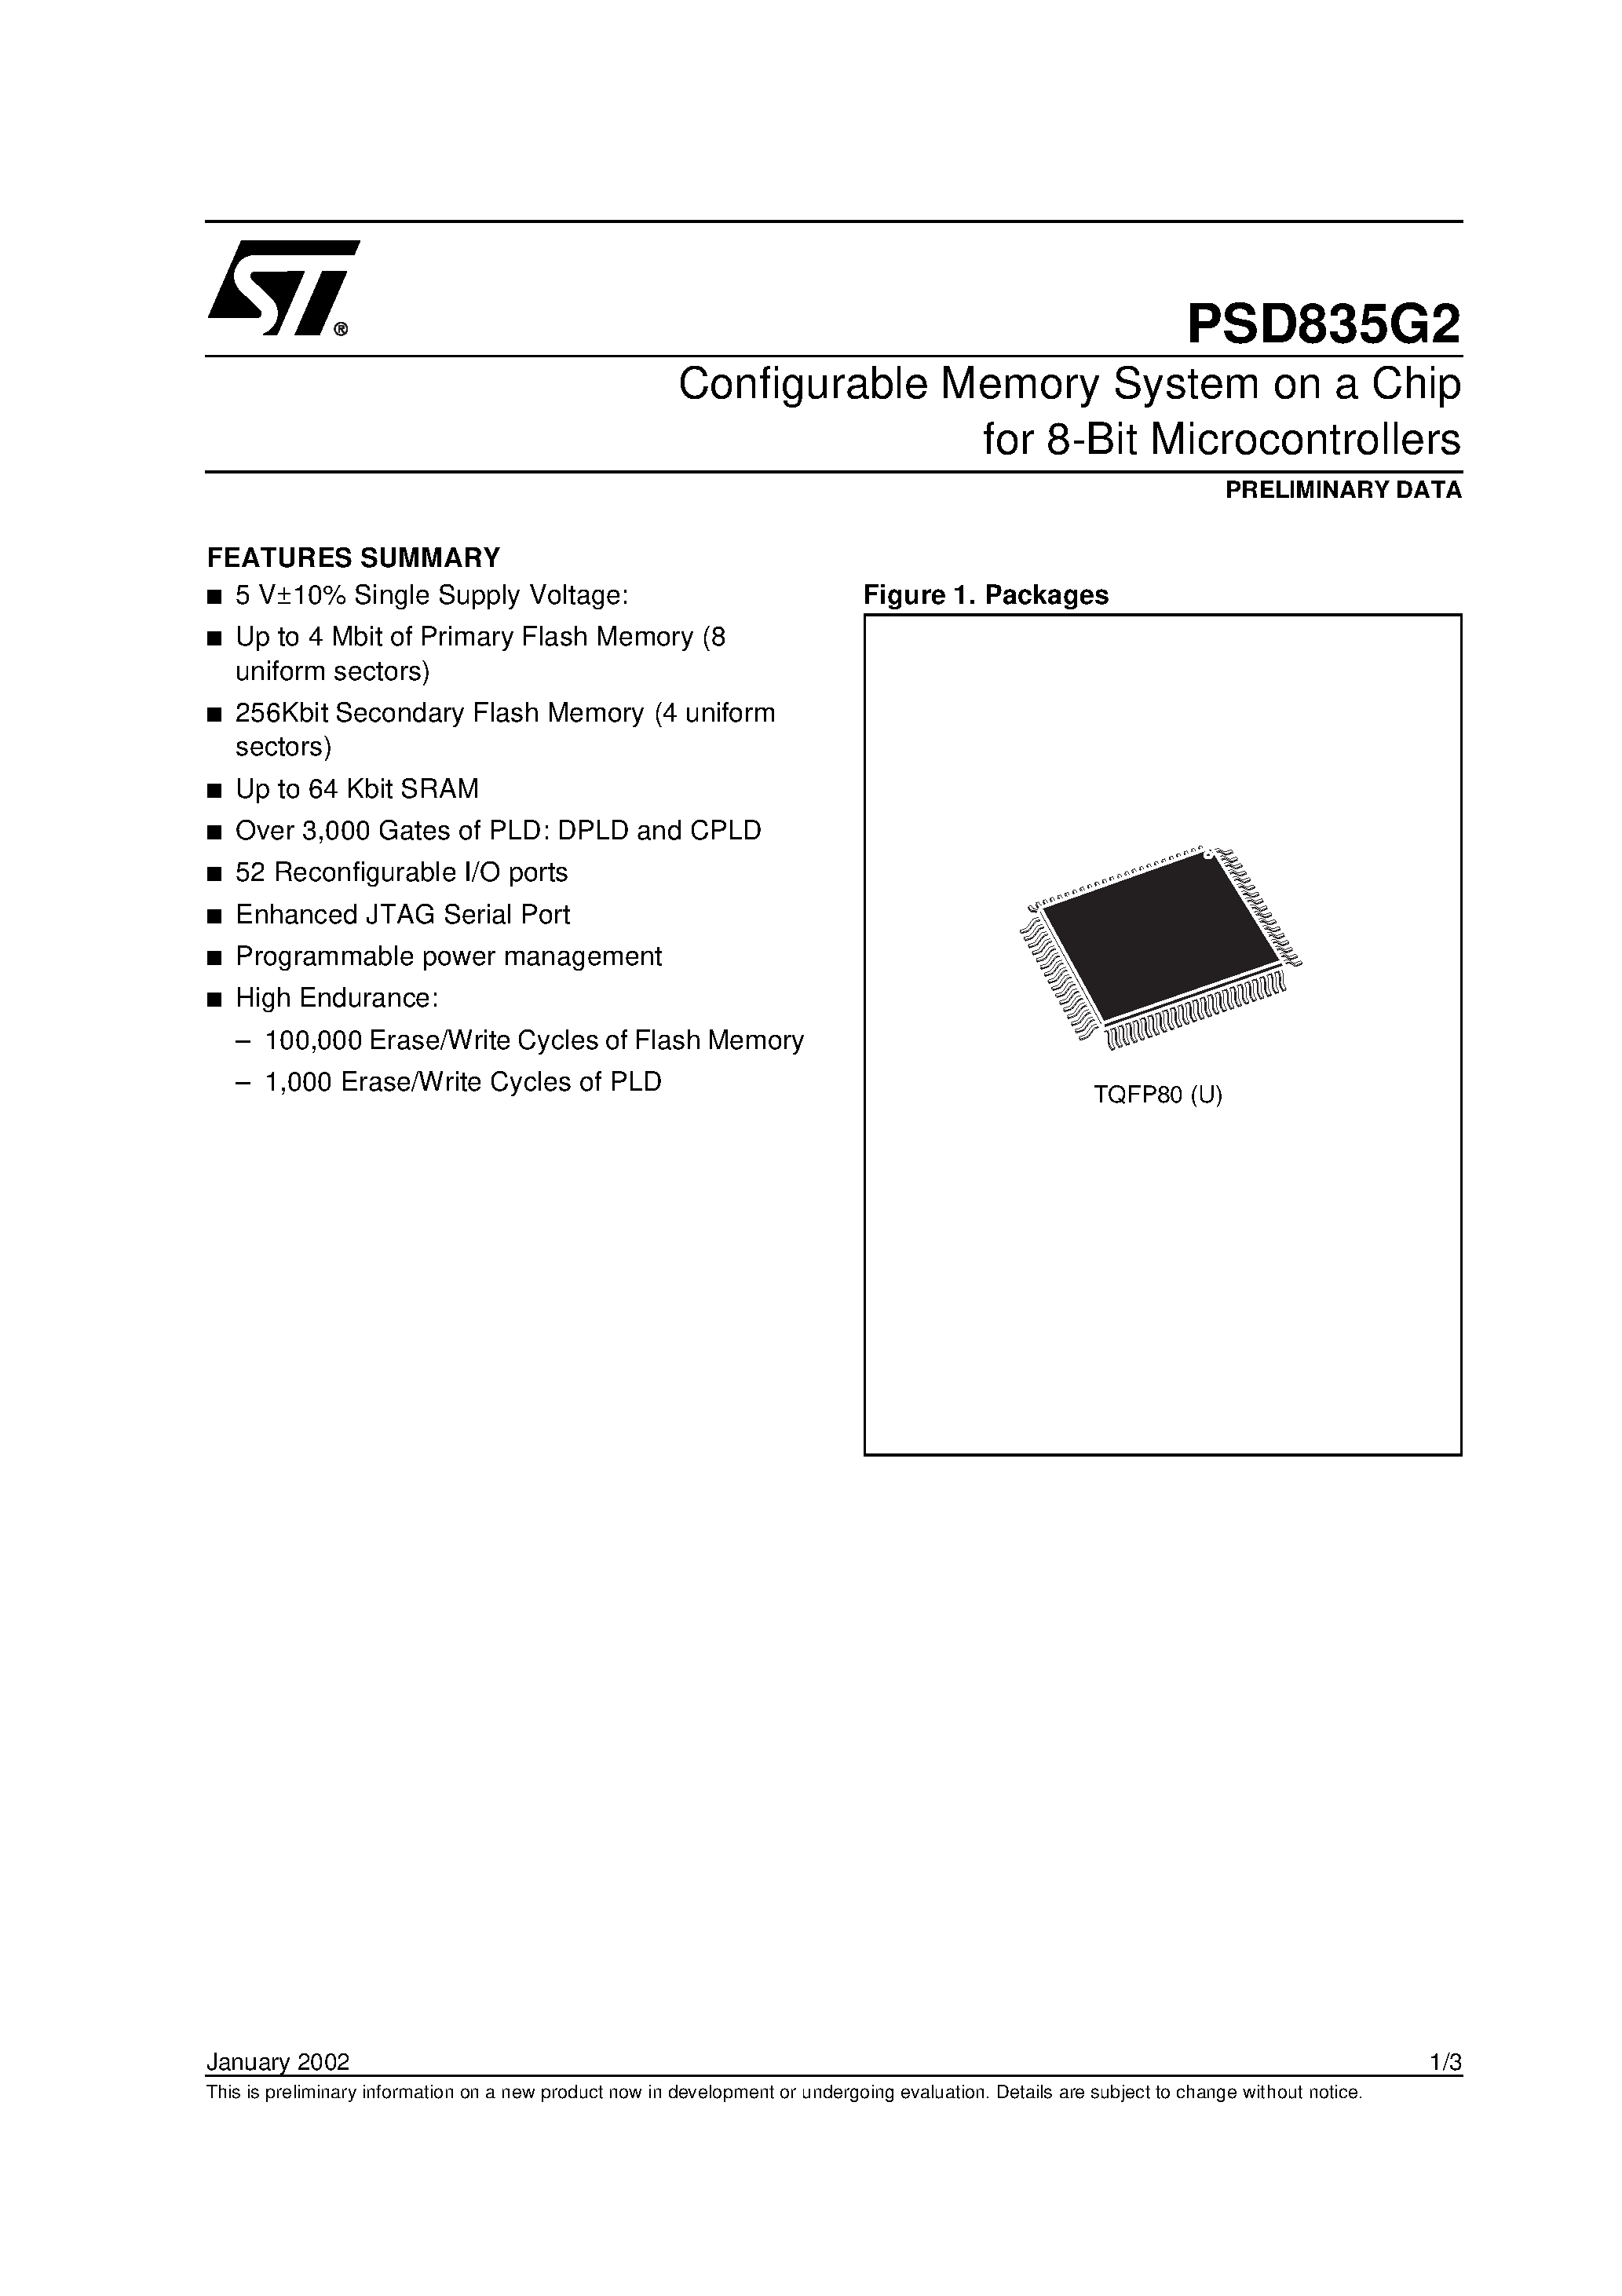 Datasheet PSD835F2-A-12M - Configurable Memory System on a Chip for 8-Bit Microcontrollers page 1